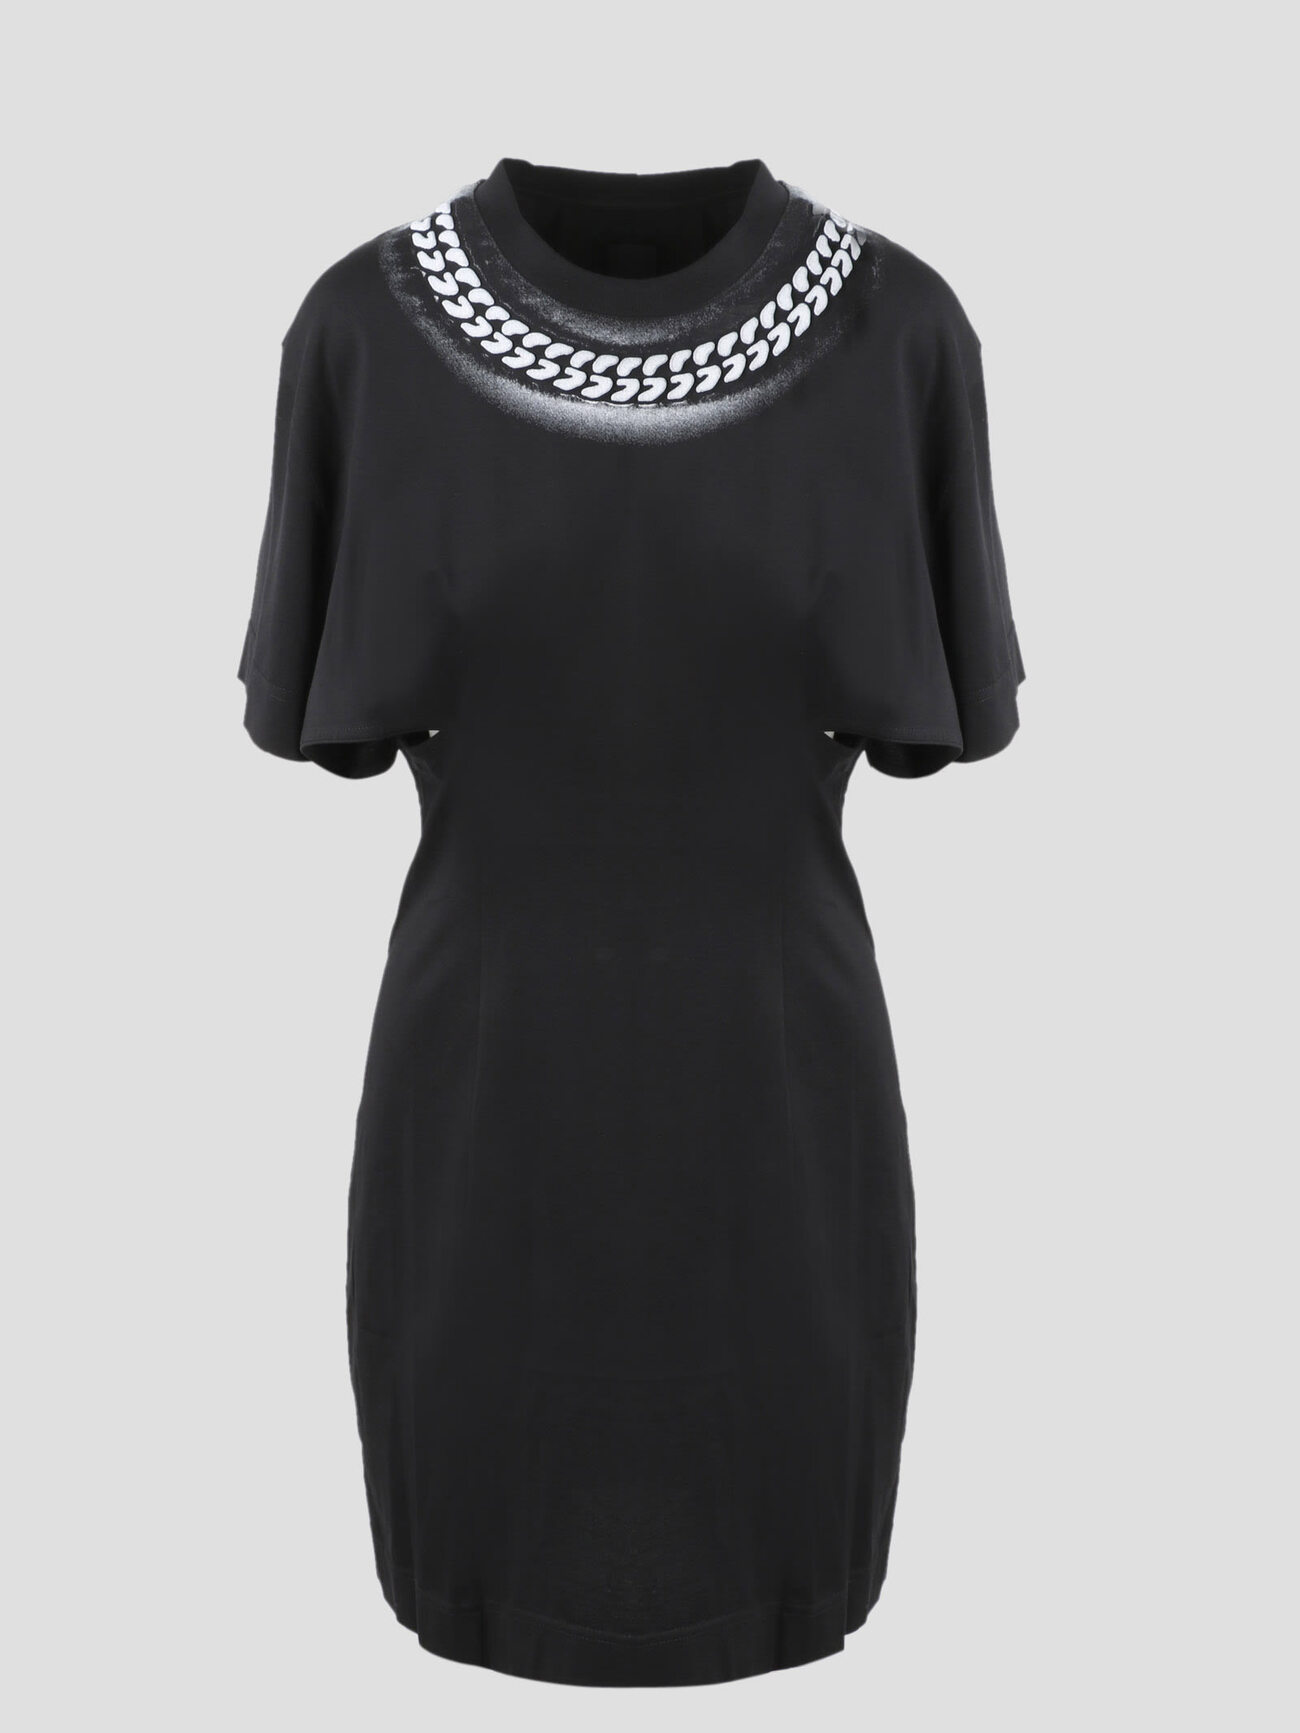 Givenchy Cut Out Dress in black